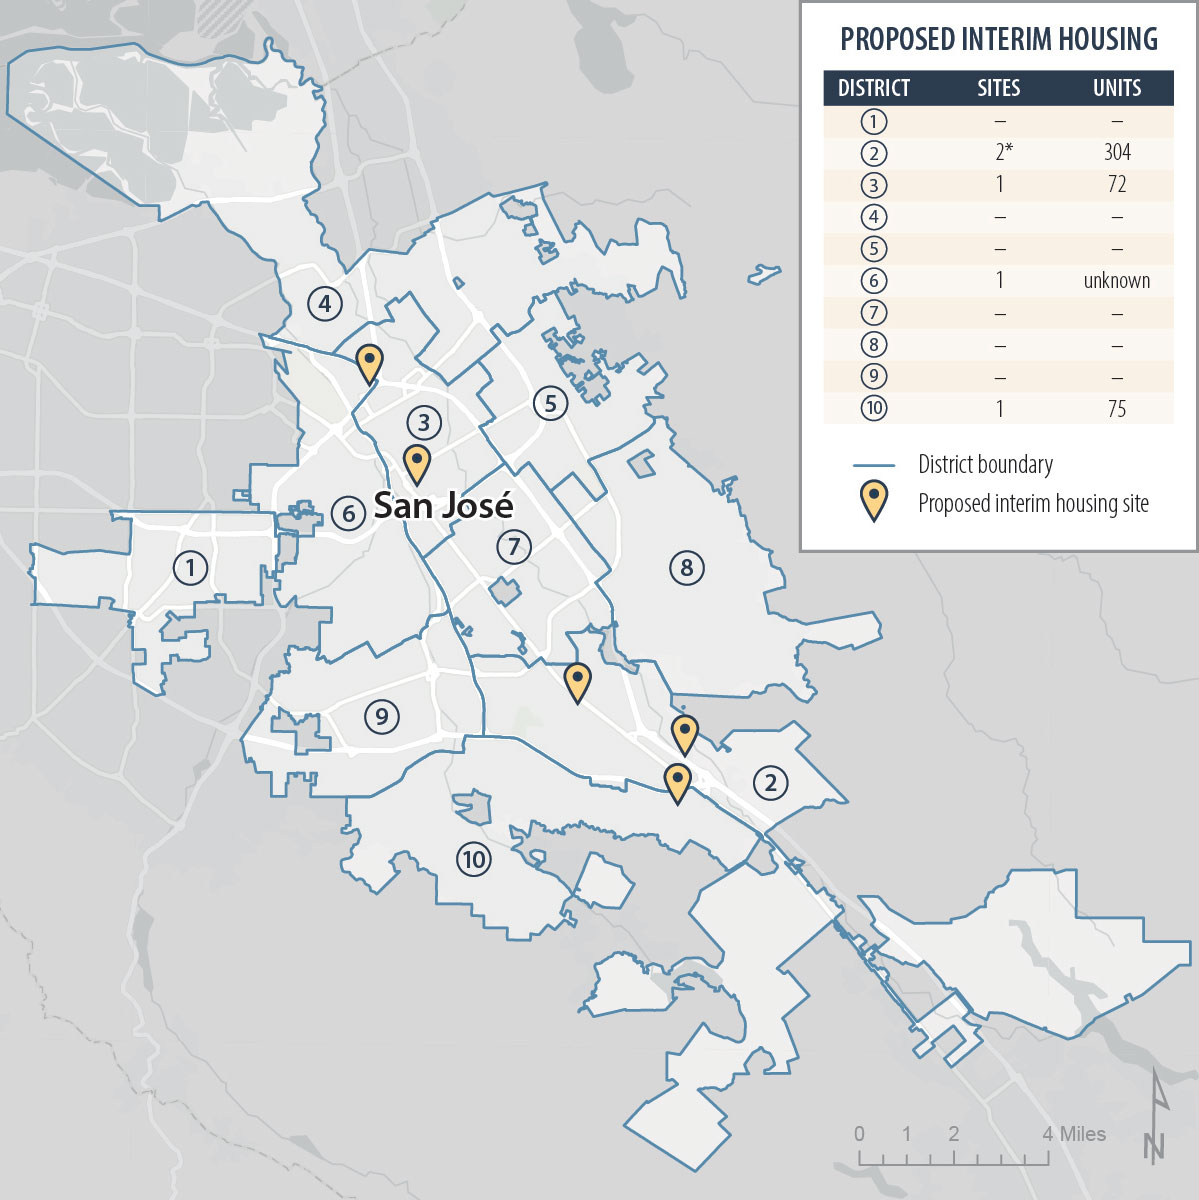 Figure 10, a map of the city of San Jose depicting the locations of the five proposed sites for interim housing for people experiencing homelessness that San Jose has identified.